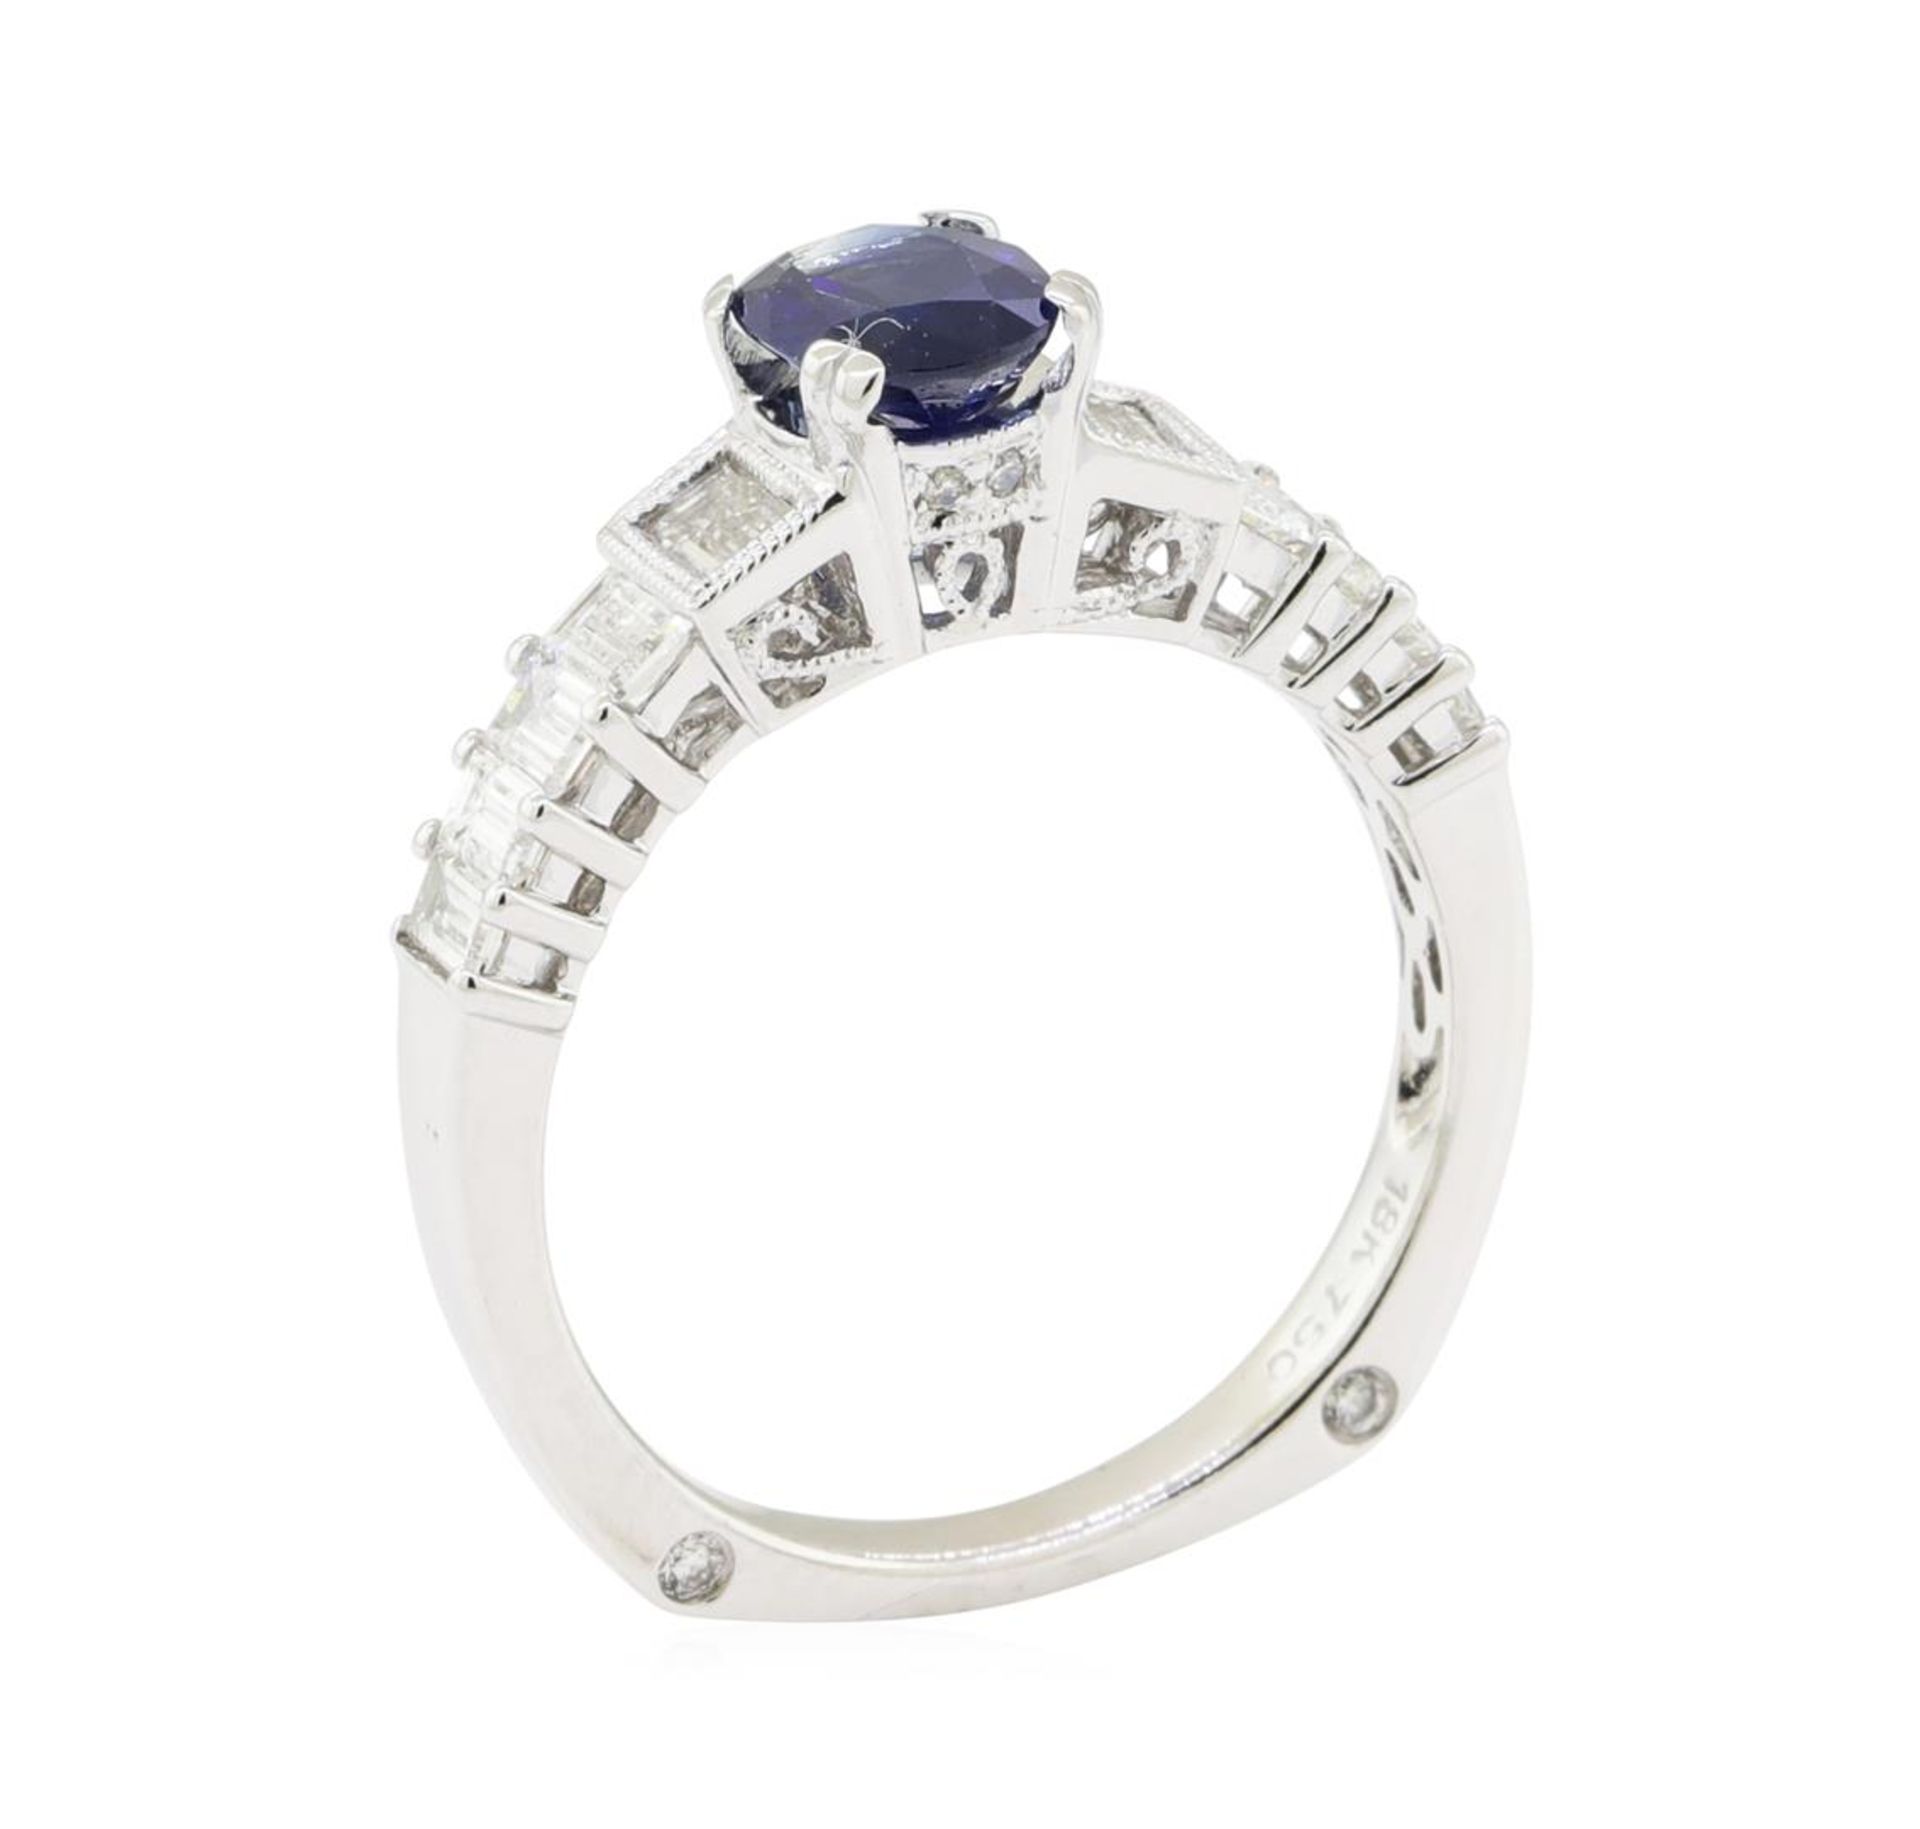 1.85 ctw Sapphire and Diamond Ring - 18KT White Gold - Image 4 of 5